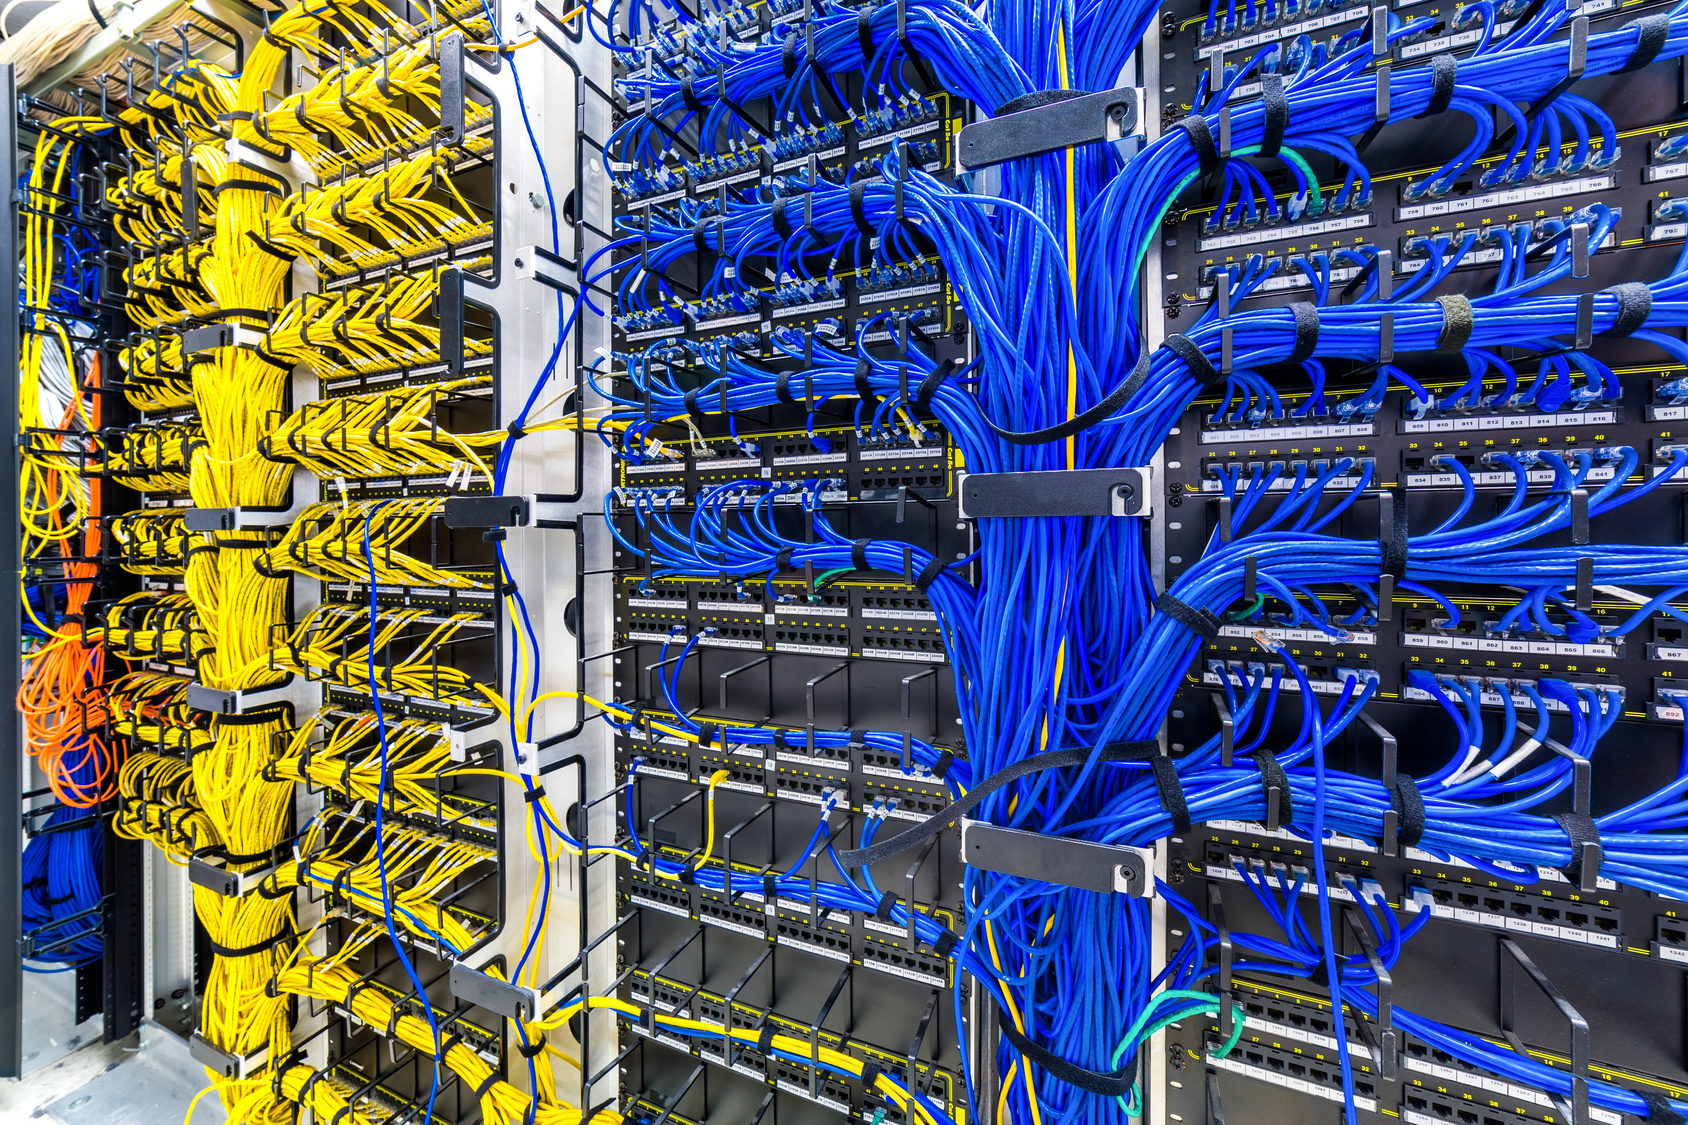 What IT Support Vendors Should Know About the Structured Cabling Market in 2019